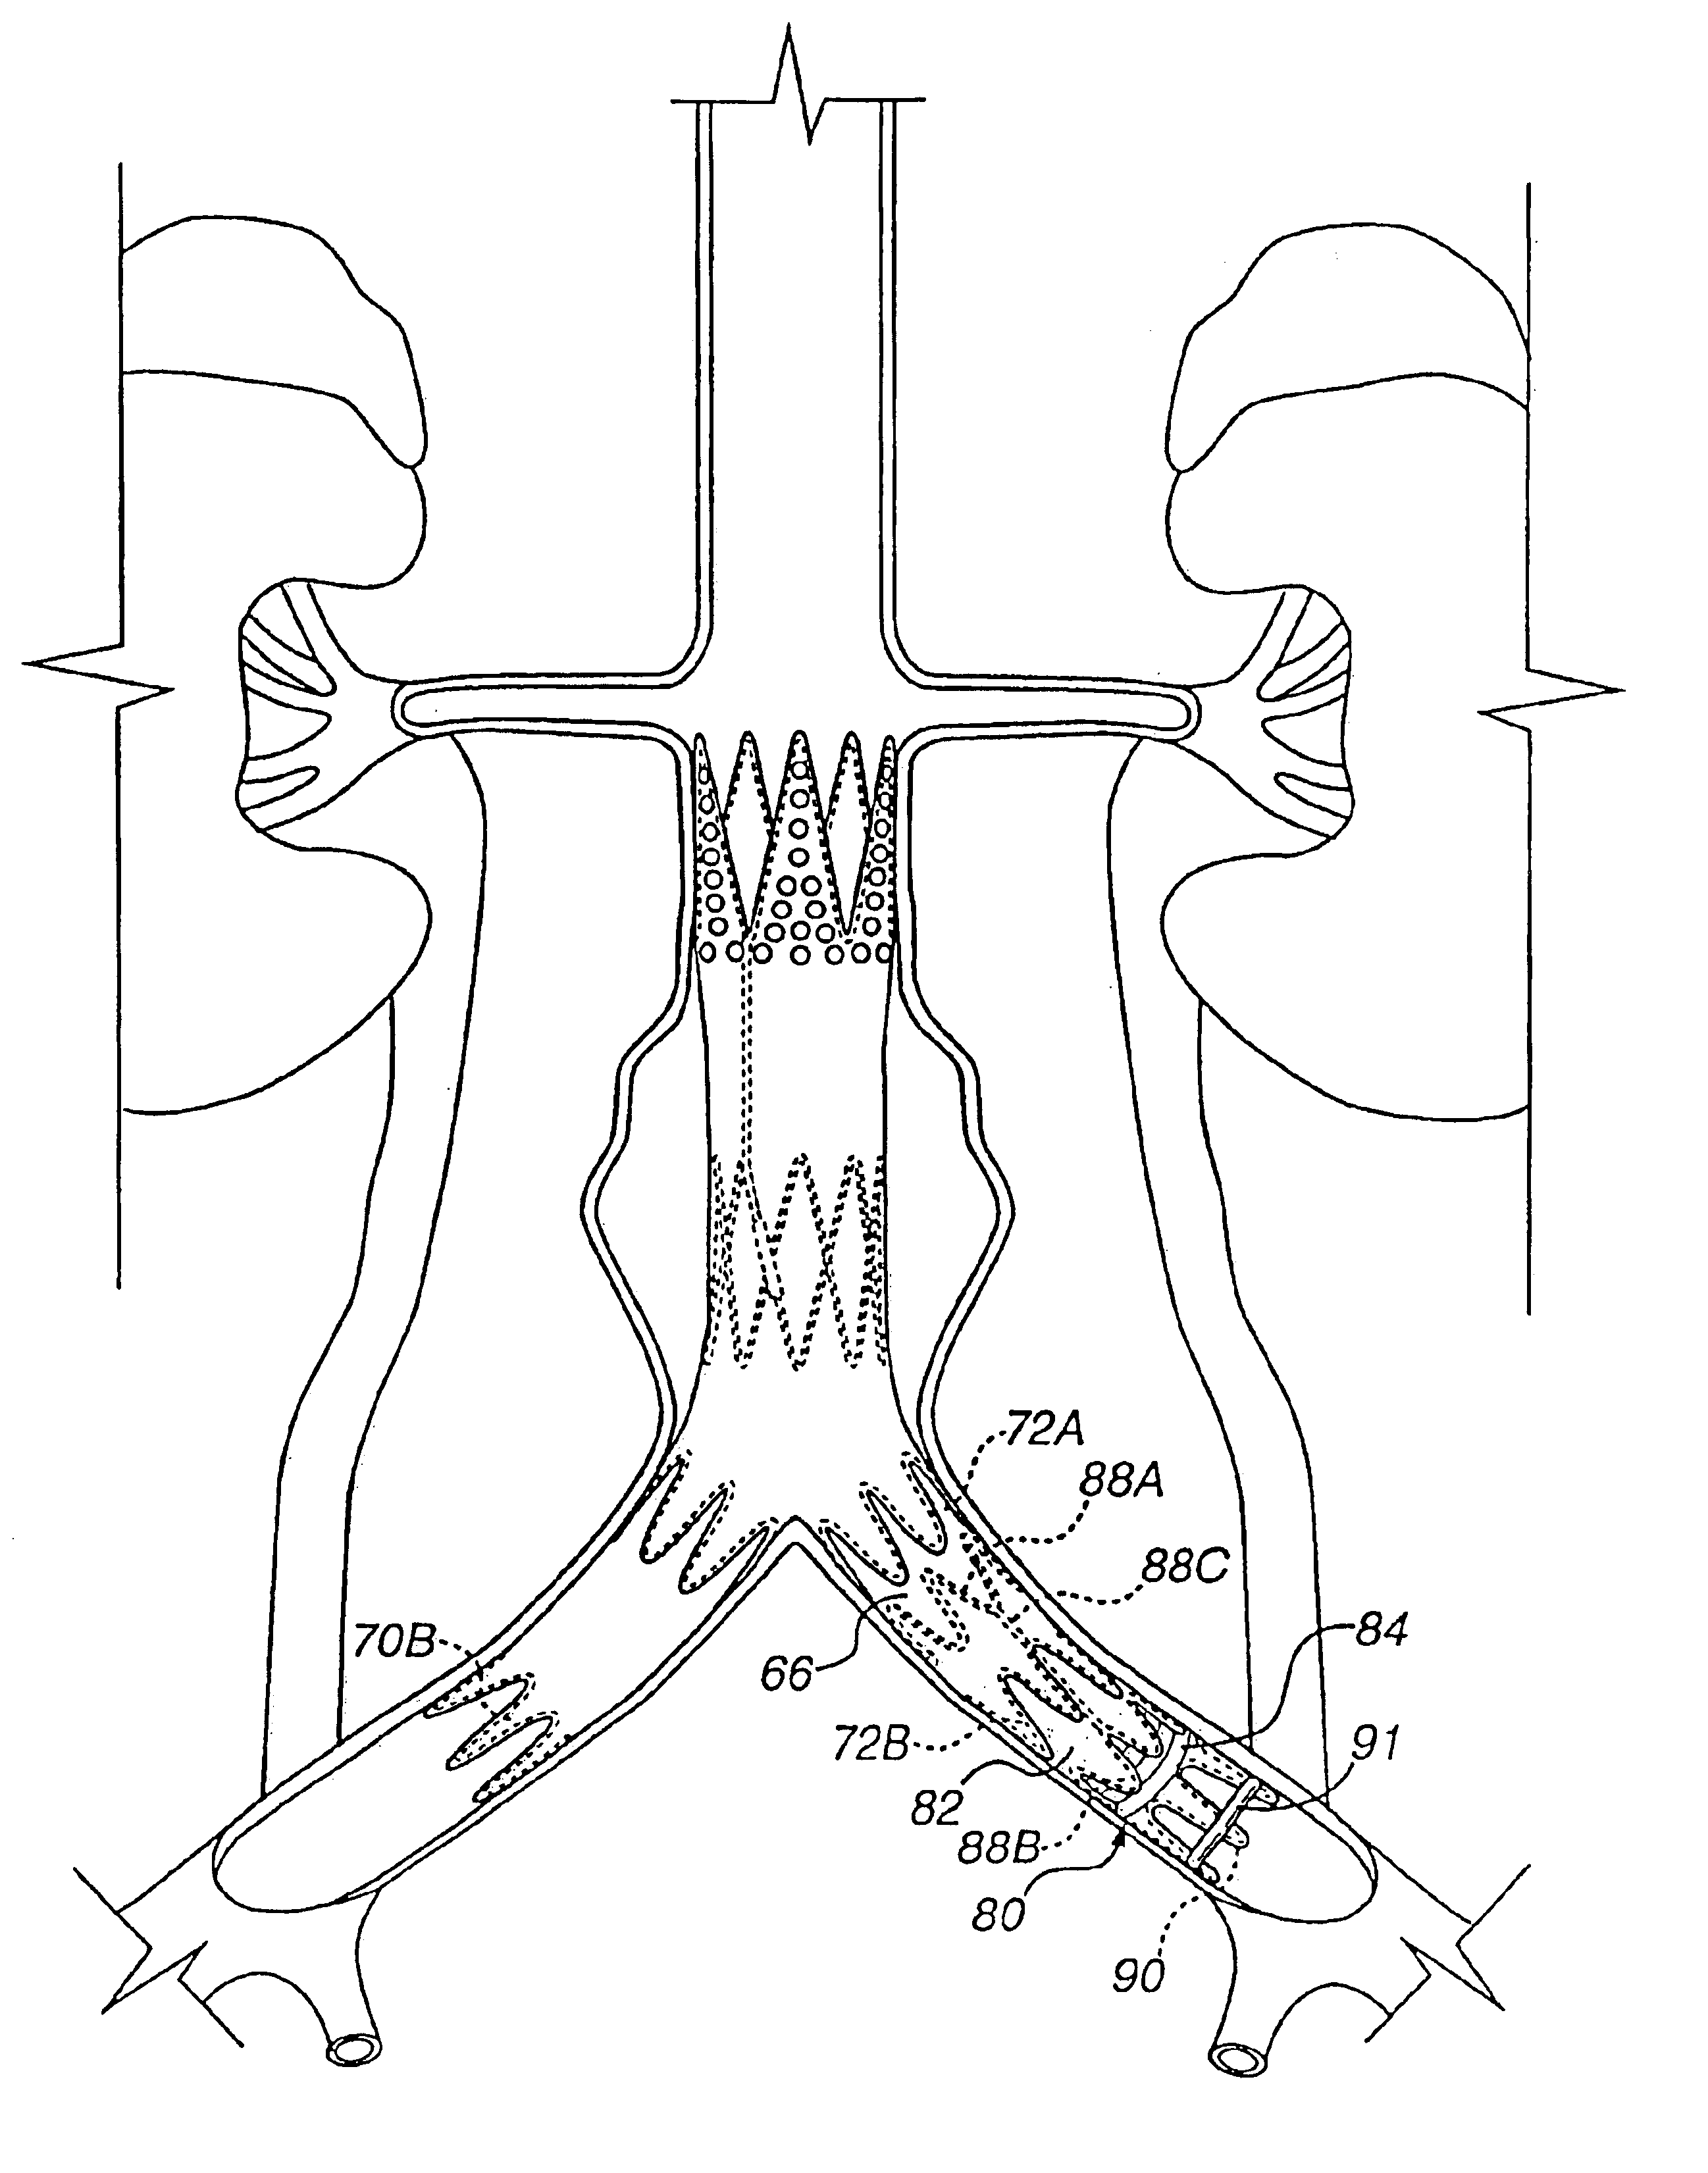 Method for engrafting a blood vessel